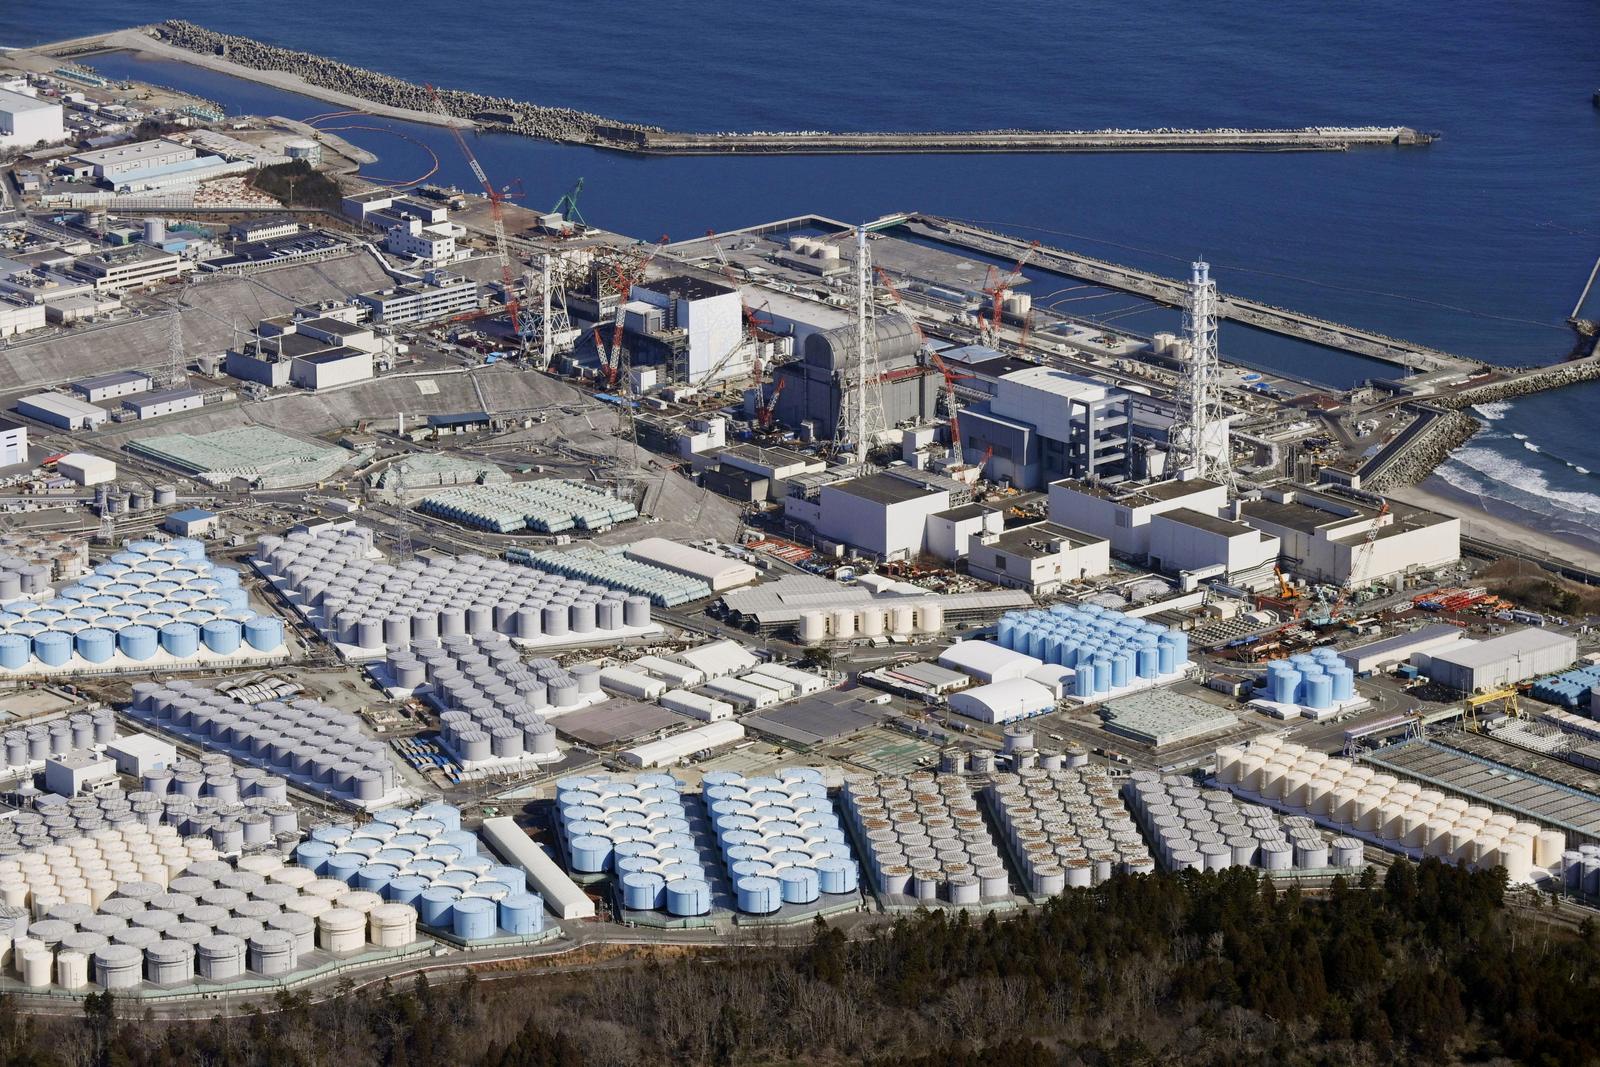 FILE PHOTO: An aerial view shows the storage tanks for treated water at the tsunami-crippled Fukushima Daiichi nuclear power plant in Okuma town, Fukushima prefecture, Japan February 13, 2021, in this photo taken by Kyodo. Picture taken February 13, 2021. Kyodo/via REUTERS ATTENTION EDITORS - THIS IMAGE WAS PROVIDED BY A THIRD PARTY. MANDATORY CREDIT. JAPAN OUT. NO COMMERCIAL OR EDITORIAL SALES IN JAPAN/File Photo Photo: KYODO/REUTERS